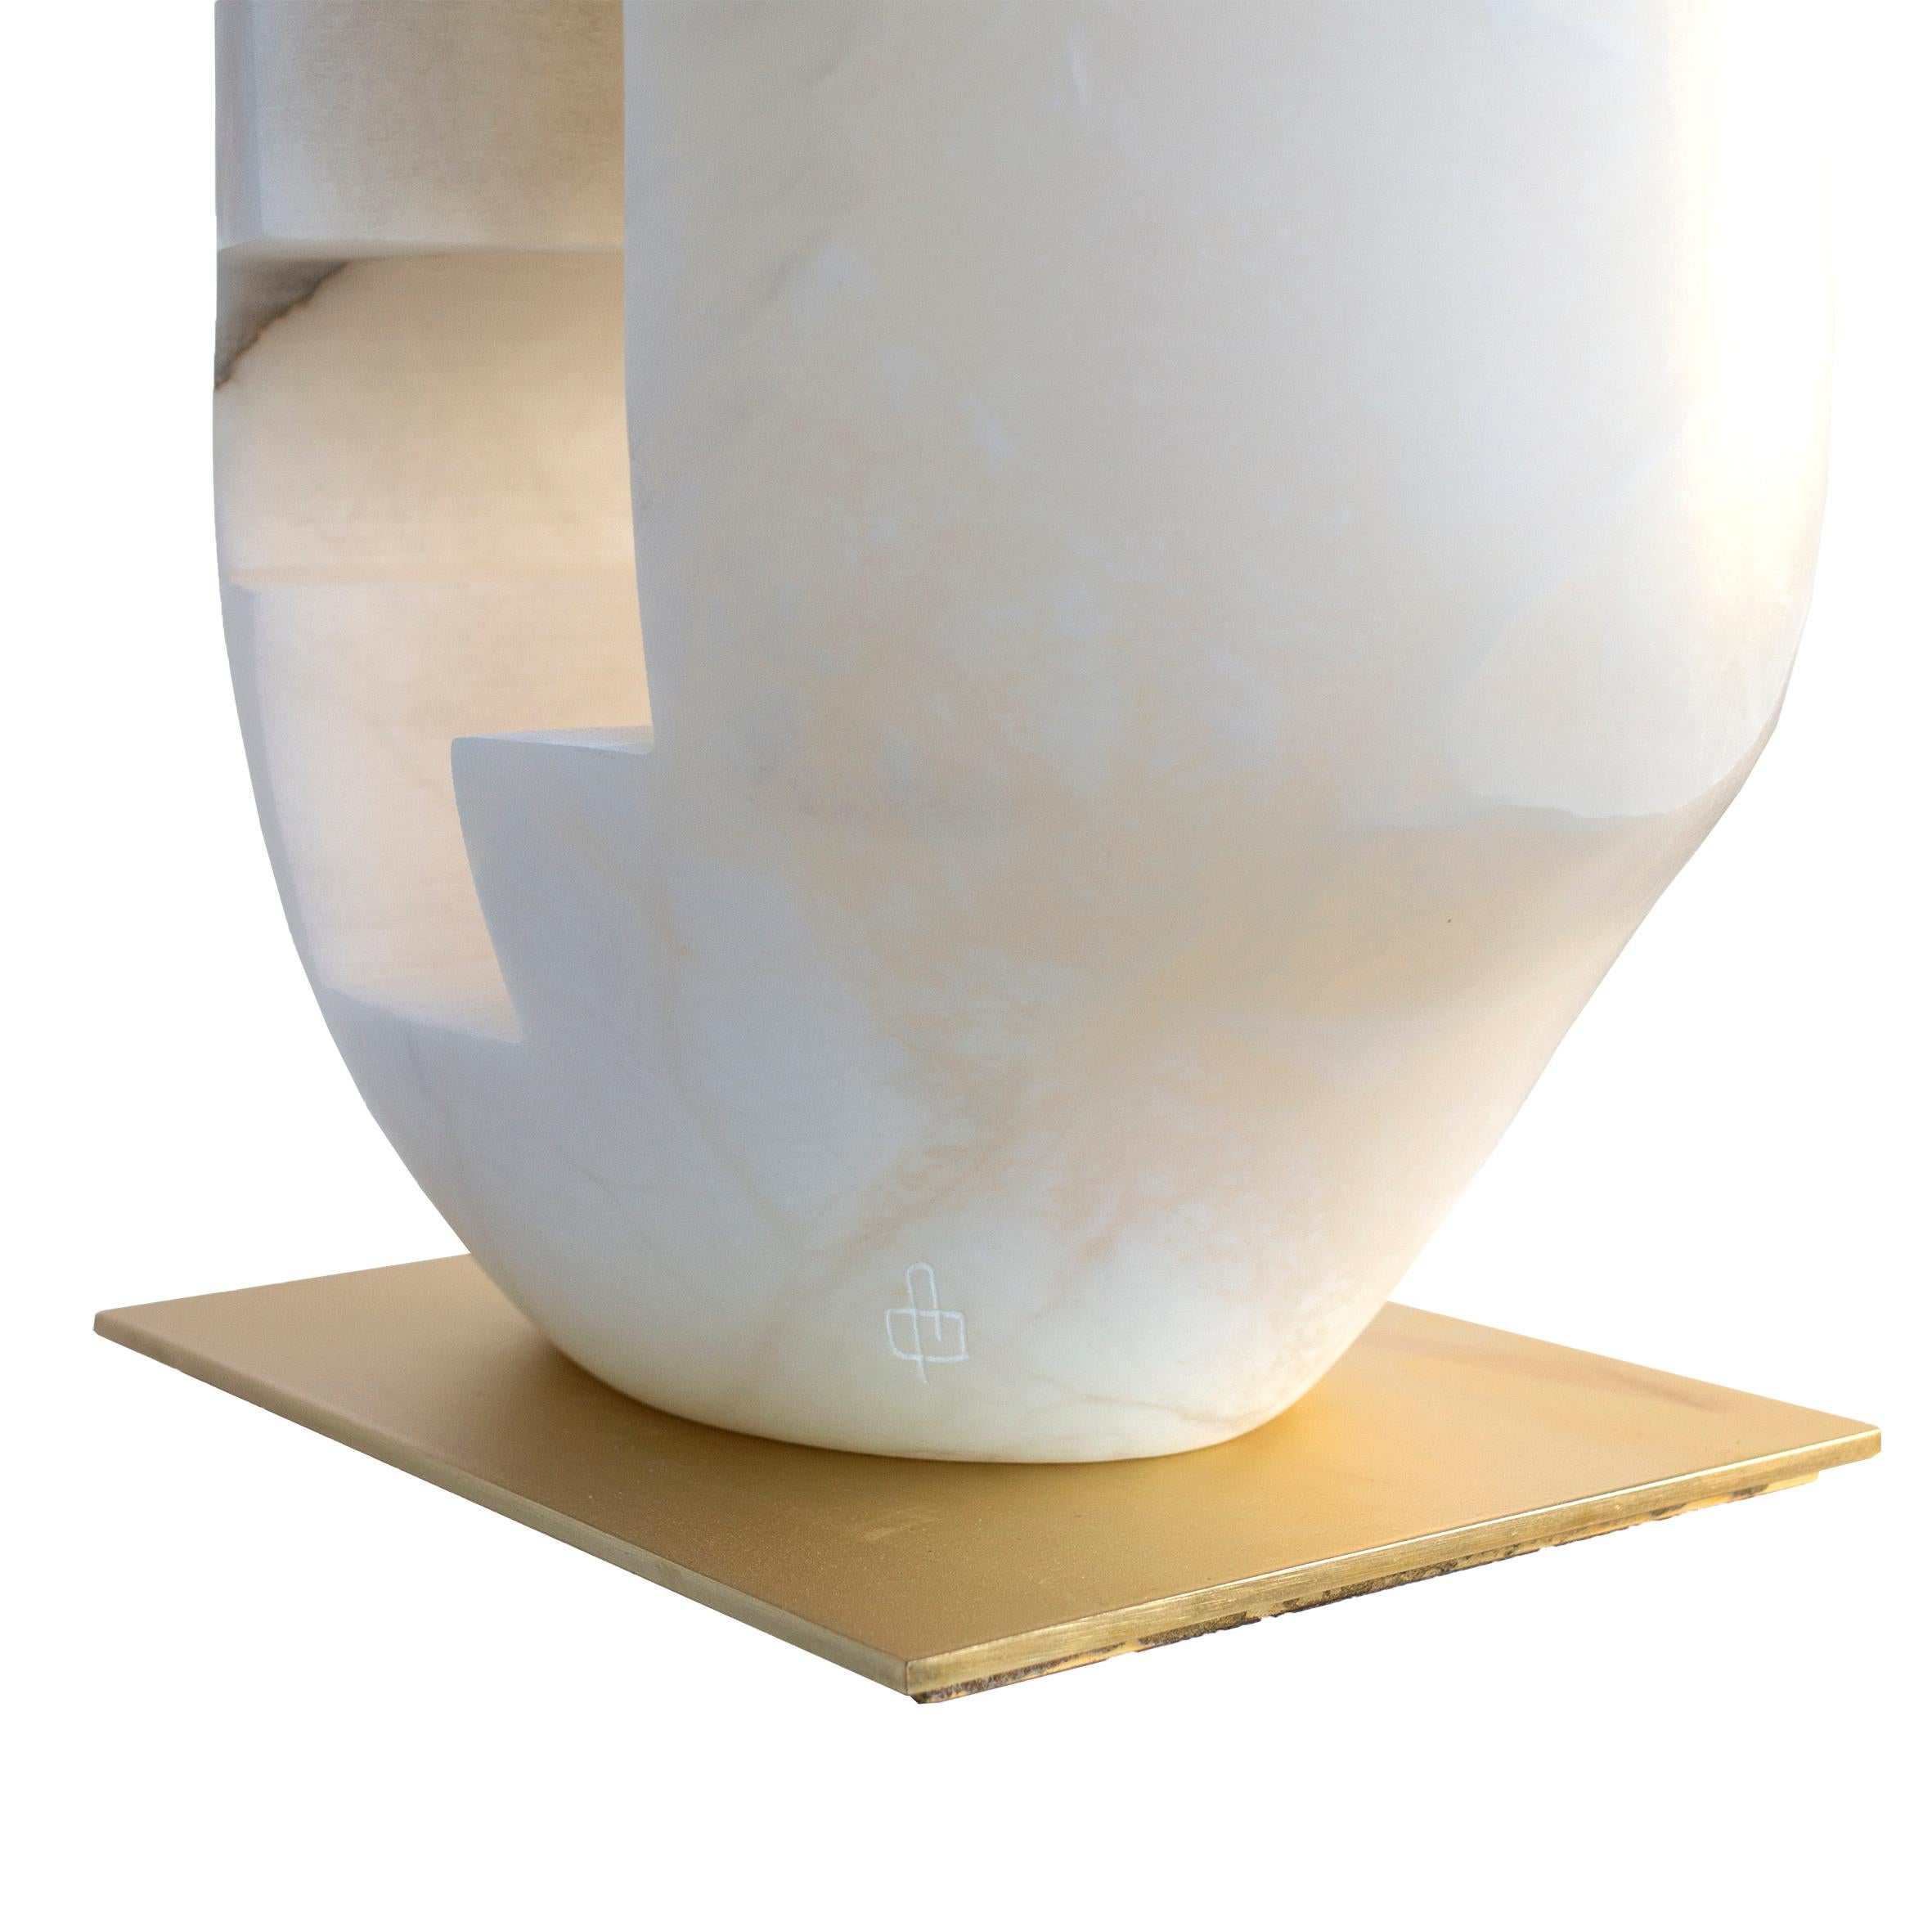 Cautiva Sculpture by Borja Barrajón
Dimensions: D 17 x W 24 x H 44 cm.
Materials: White alabaster.

Borja Barrajón Acedo (Madrid, 1985) began his training as a sculptor at the Faculty of Fine Arts in Madrid in 2006. His passion for stone as an